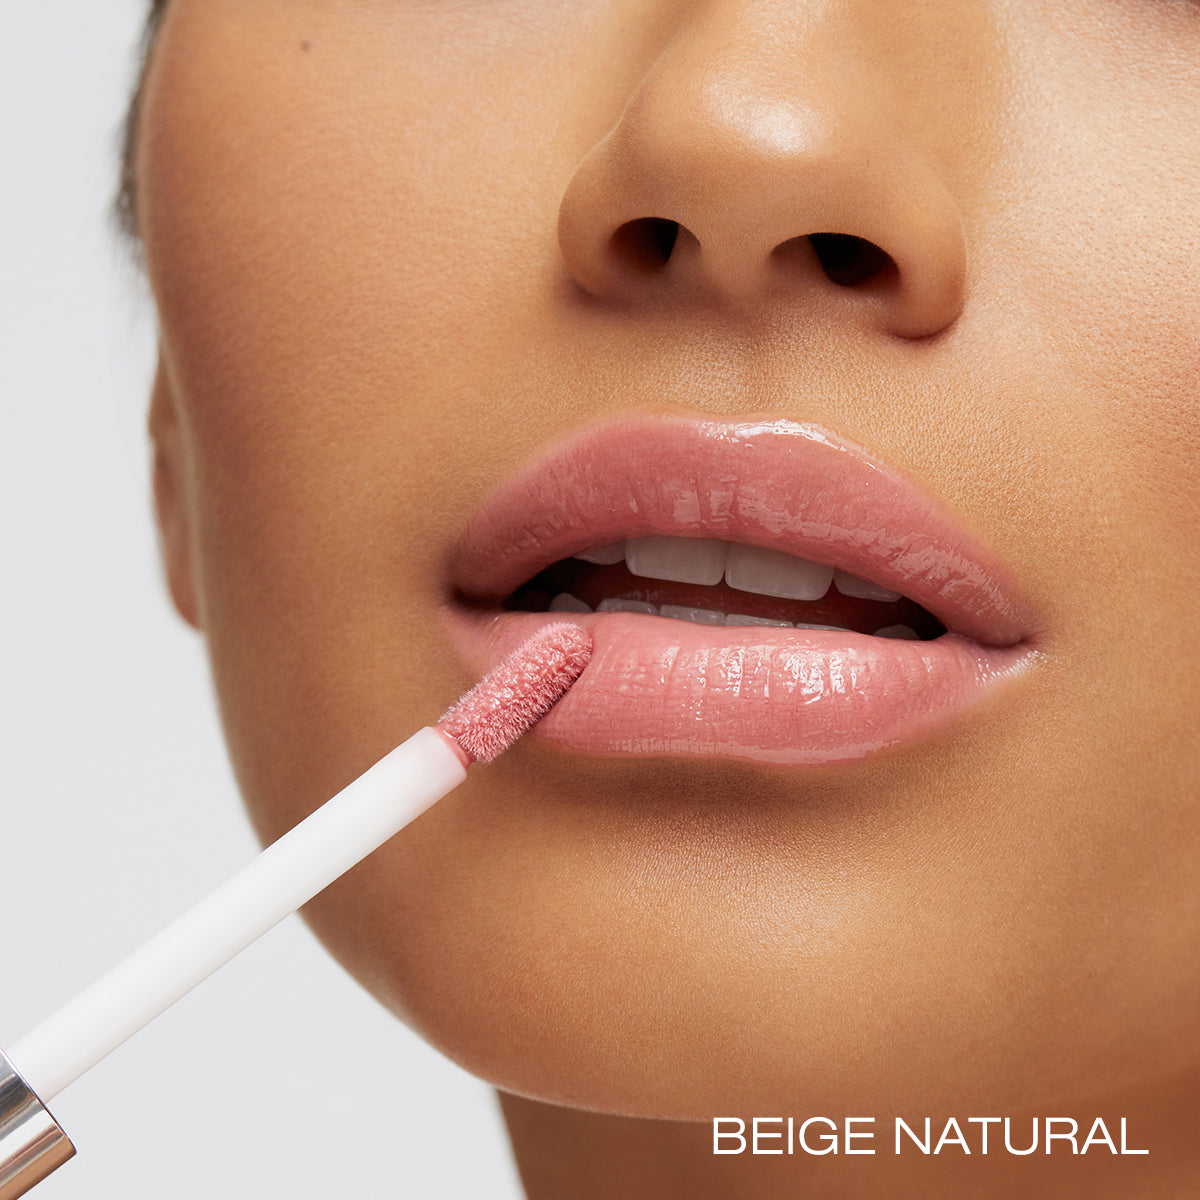 Beige Natural spin on lip gloss applied to lips demonstration